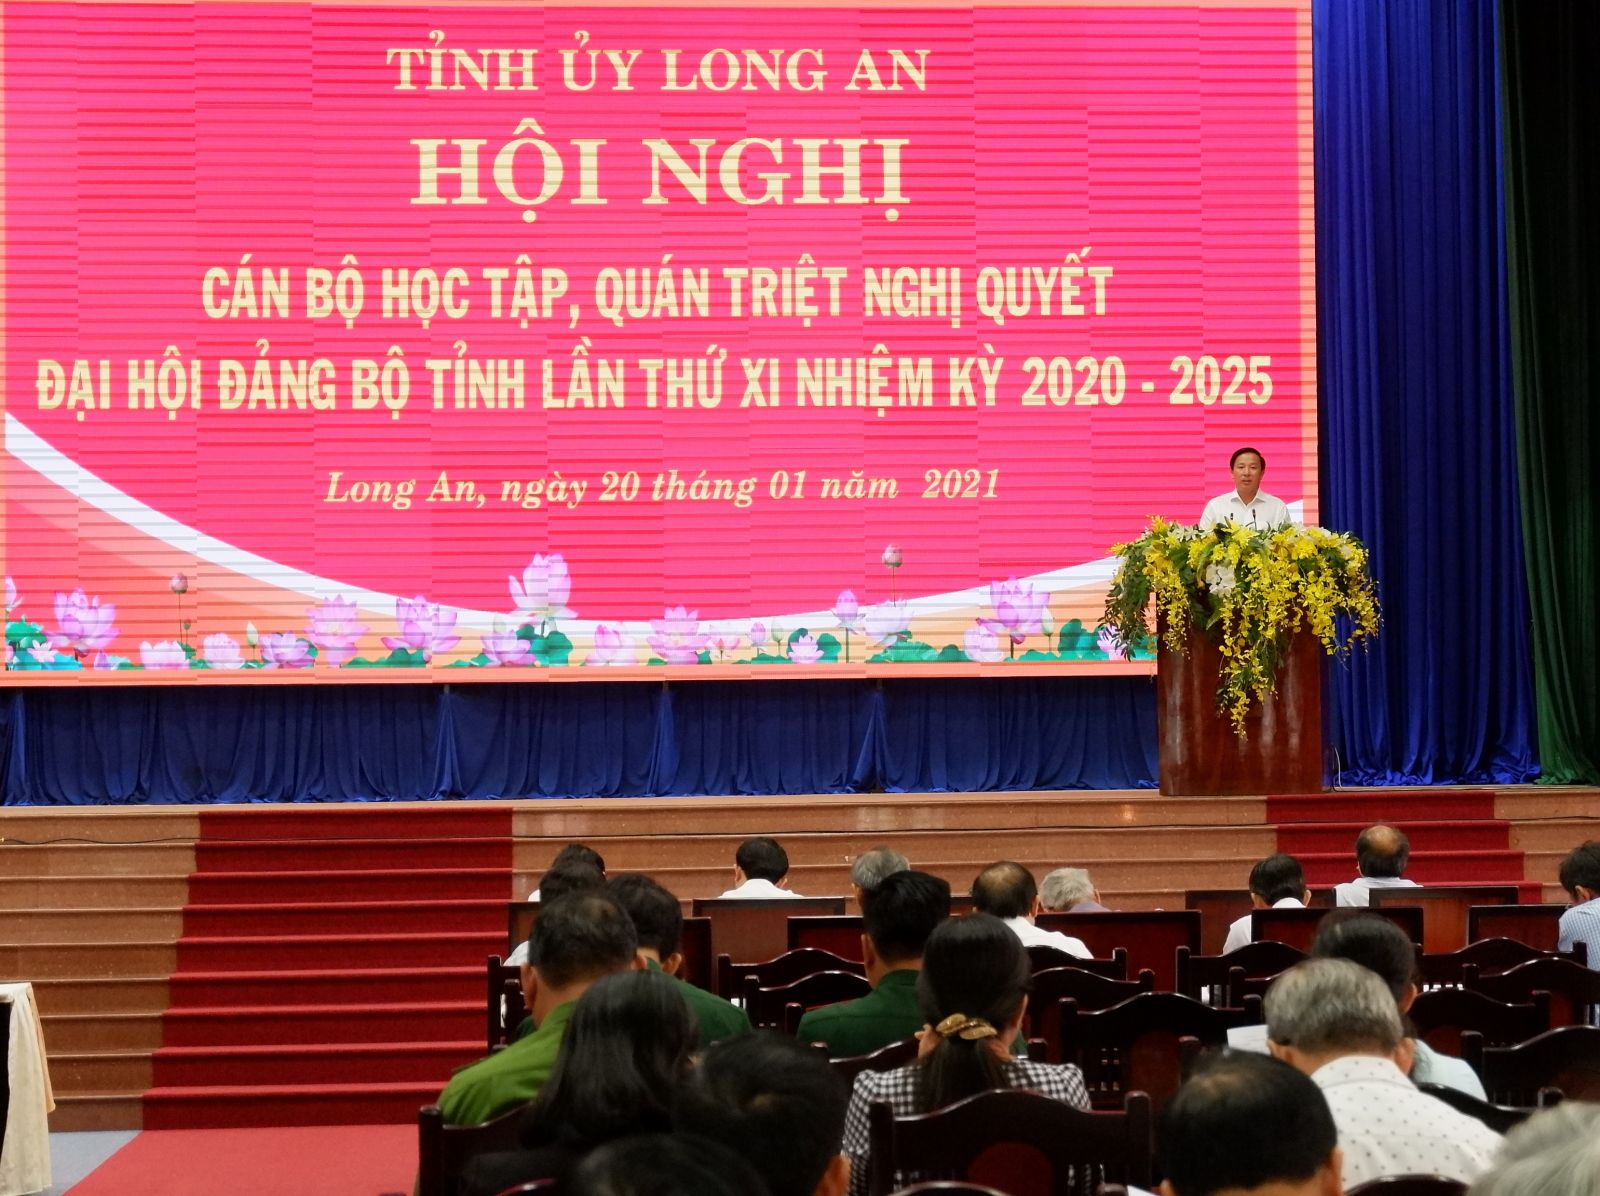 Deputy Secretary of the Provincial Party Committee, Chairman of People's Committee of Long An province - Nguyen Van Ut deploys the Action Program of the Provincial Party Committee to implement the XIth Resolution 